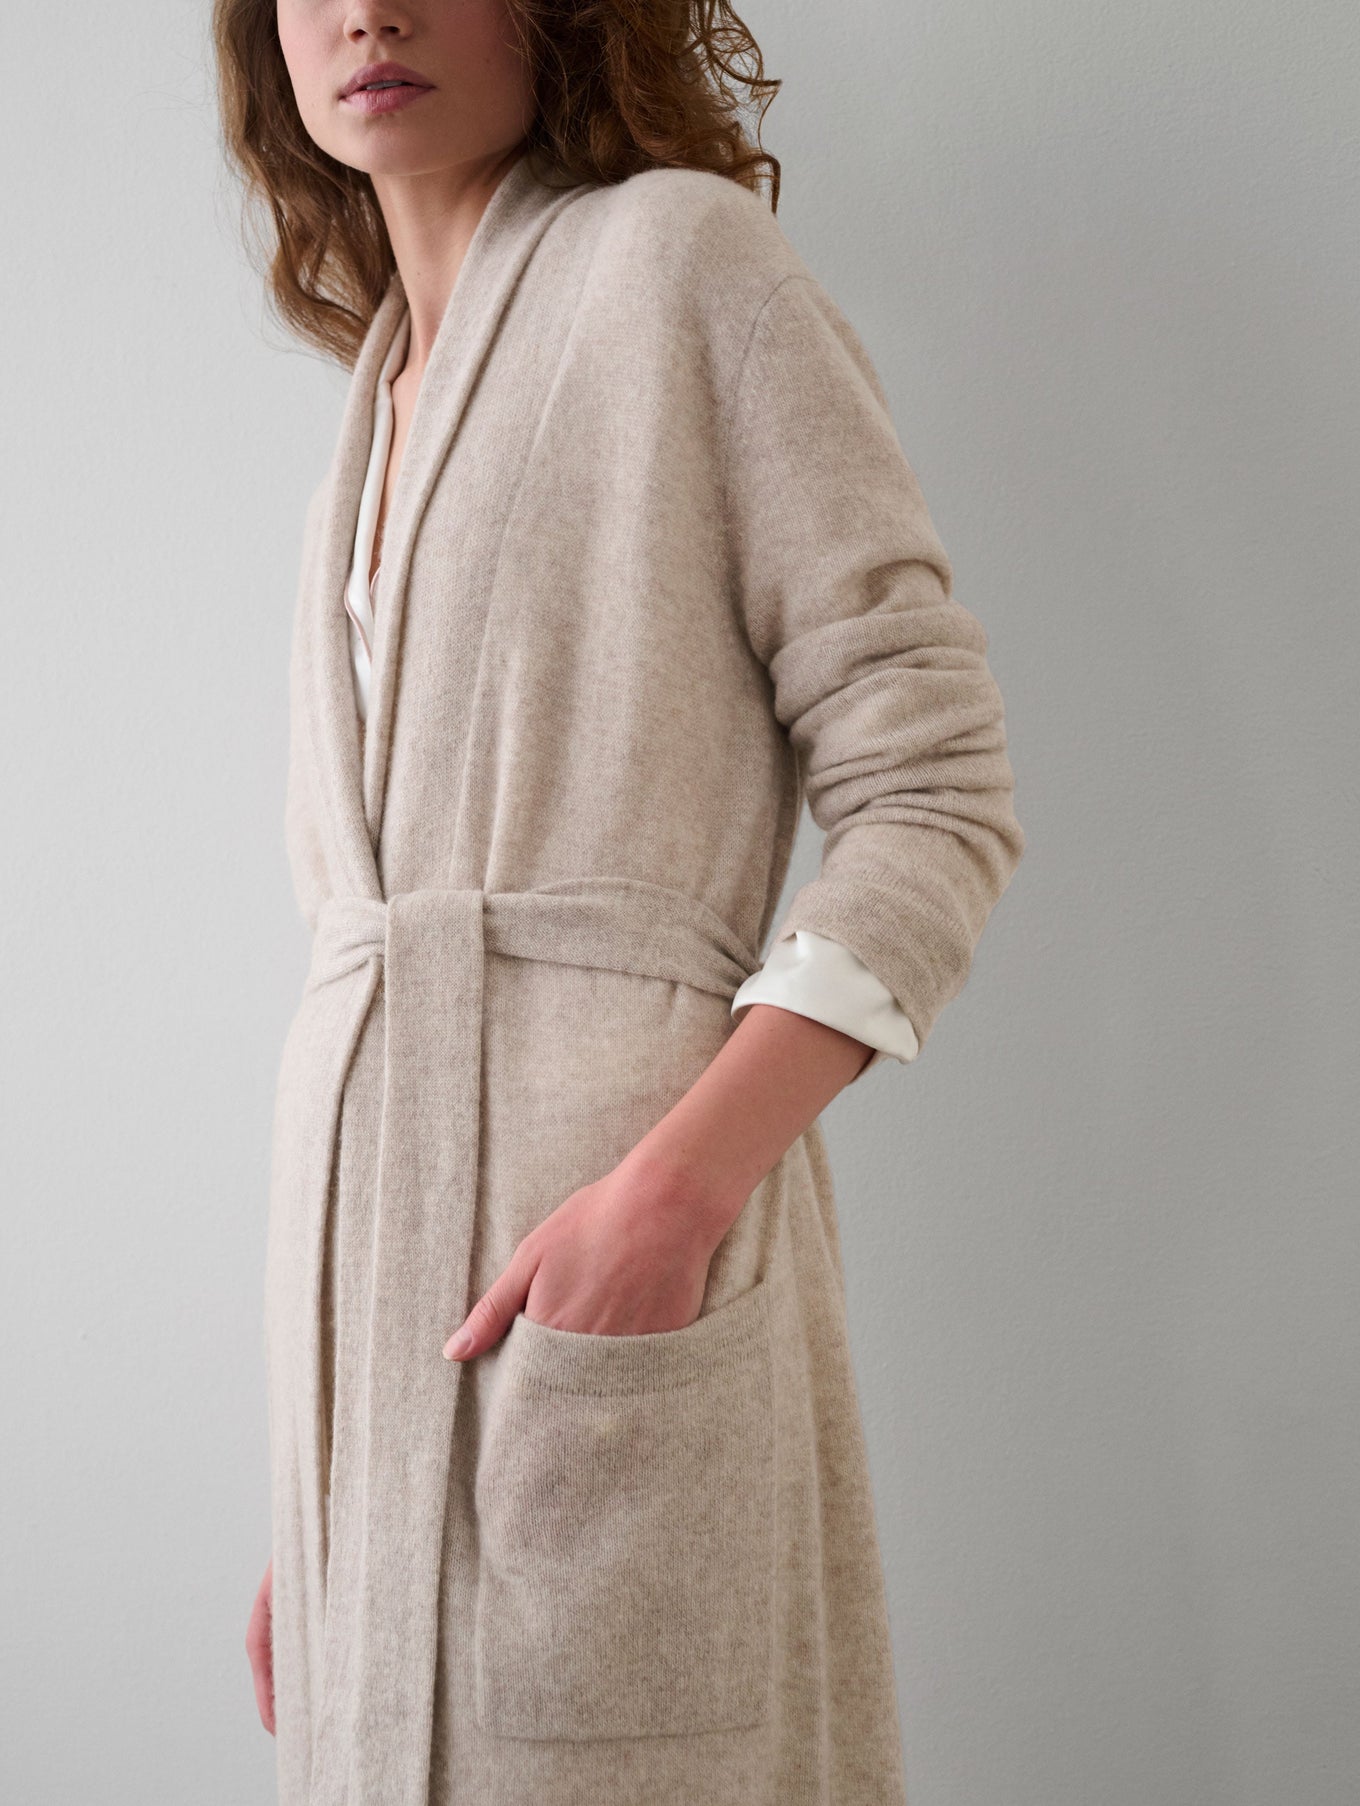 Long Cashmere Robe